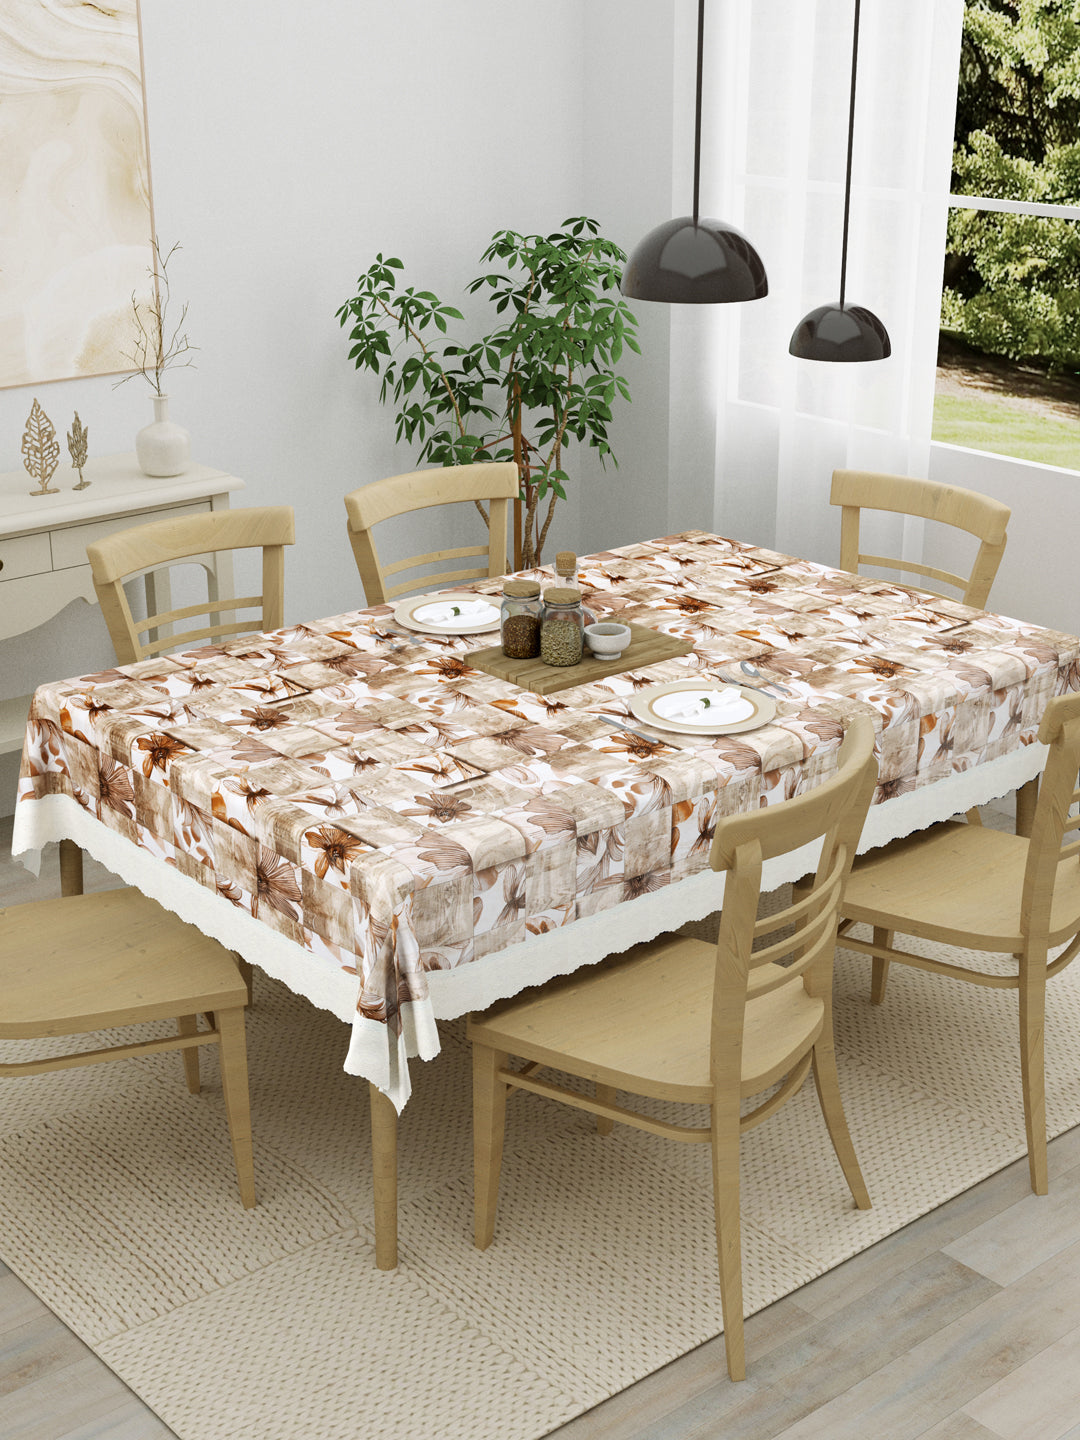 6 Seater Dining Table Cover; Material - PVC; Anti Slip; Brown Flowers & Checks